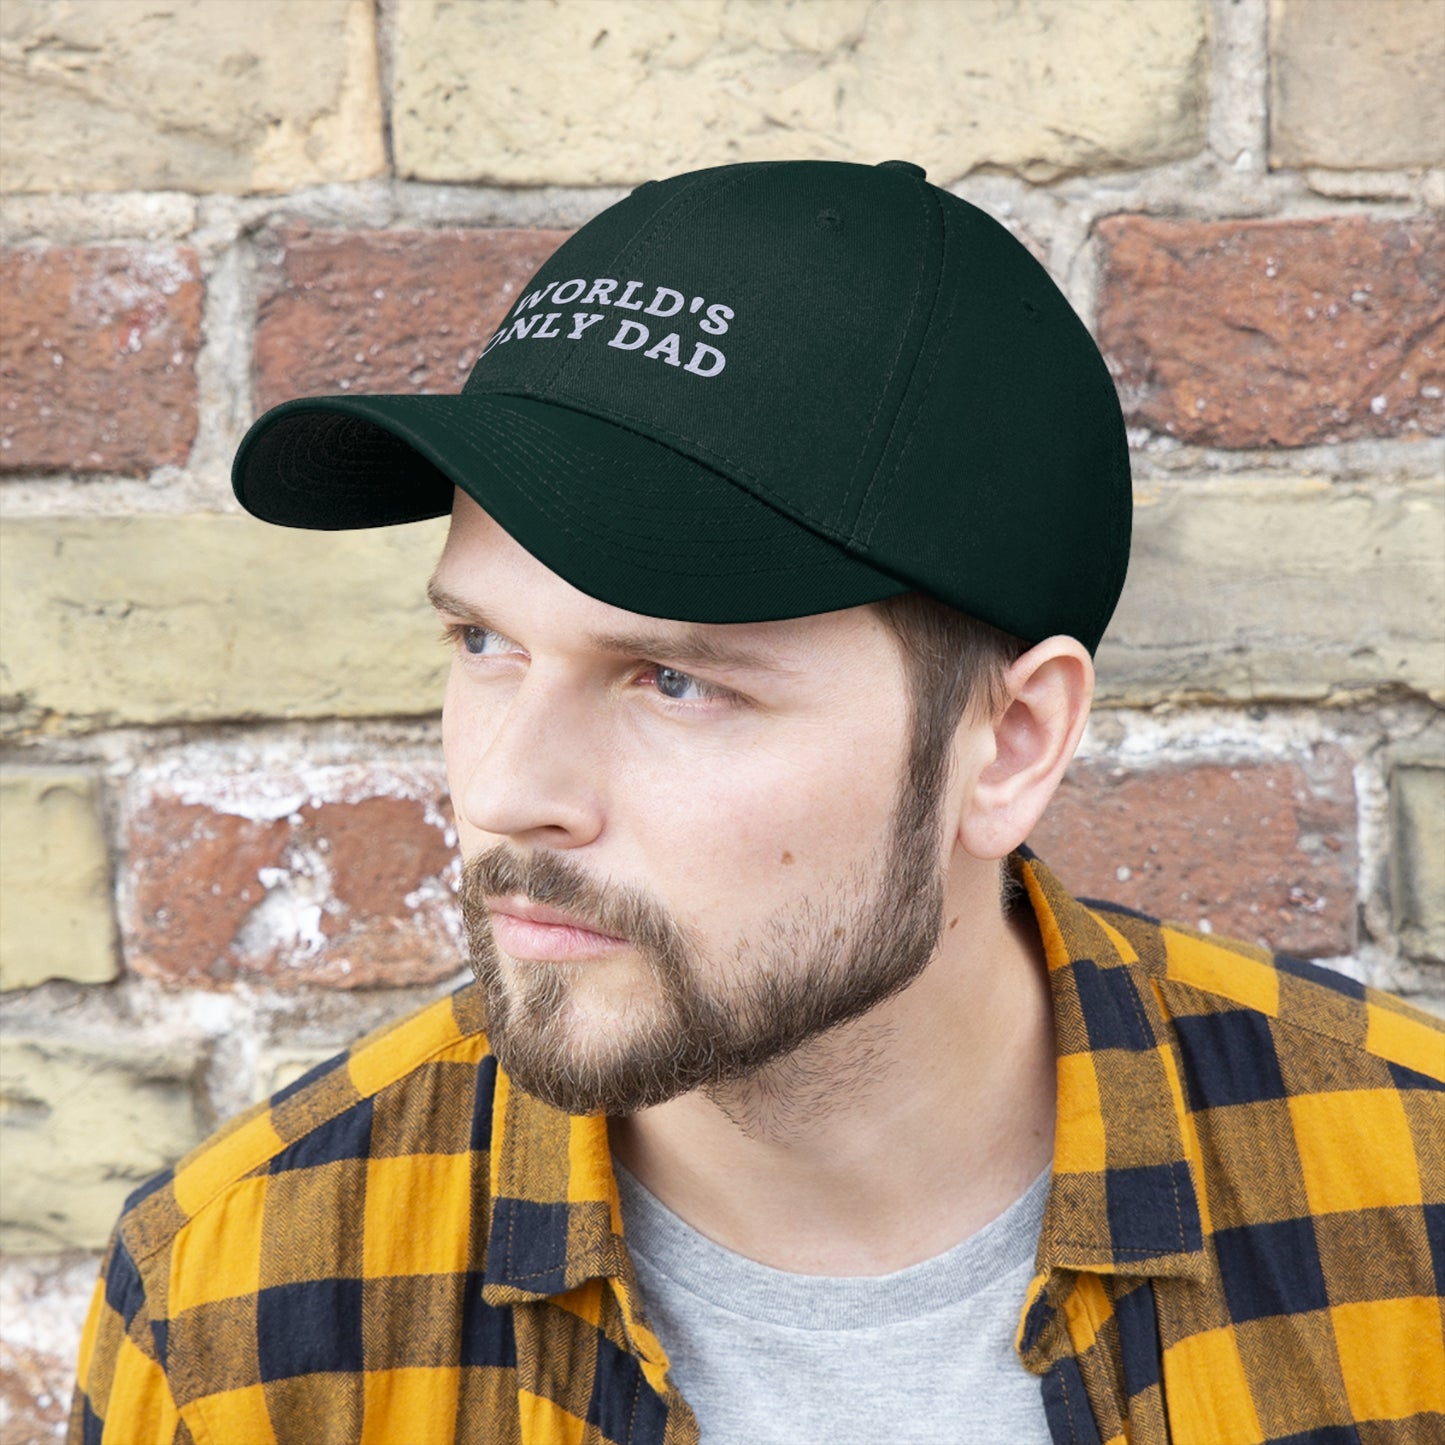 "World's Only Dad" Hat